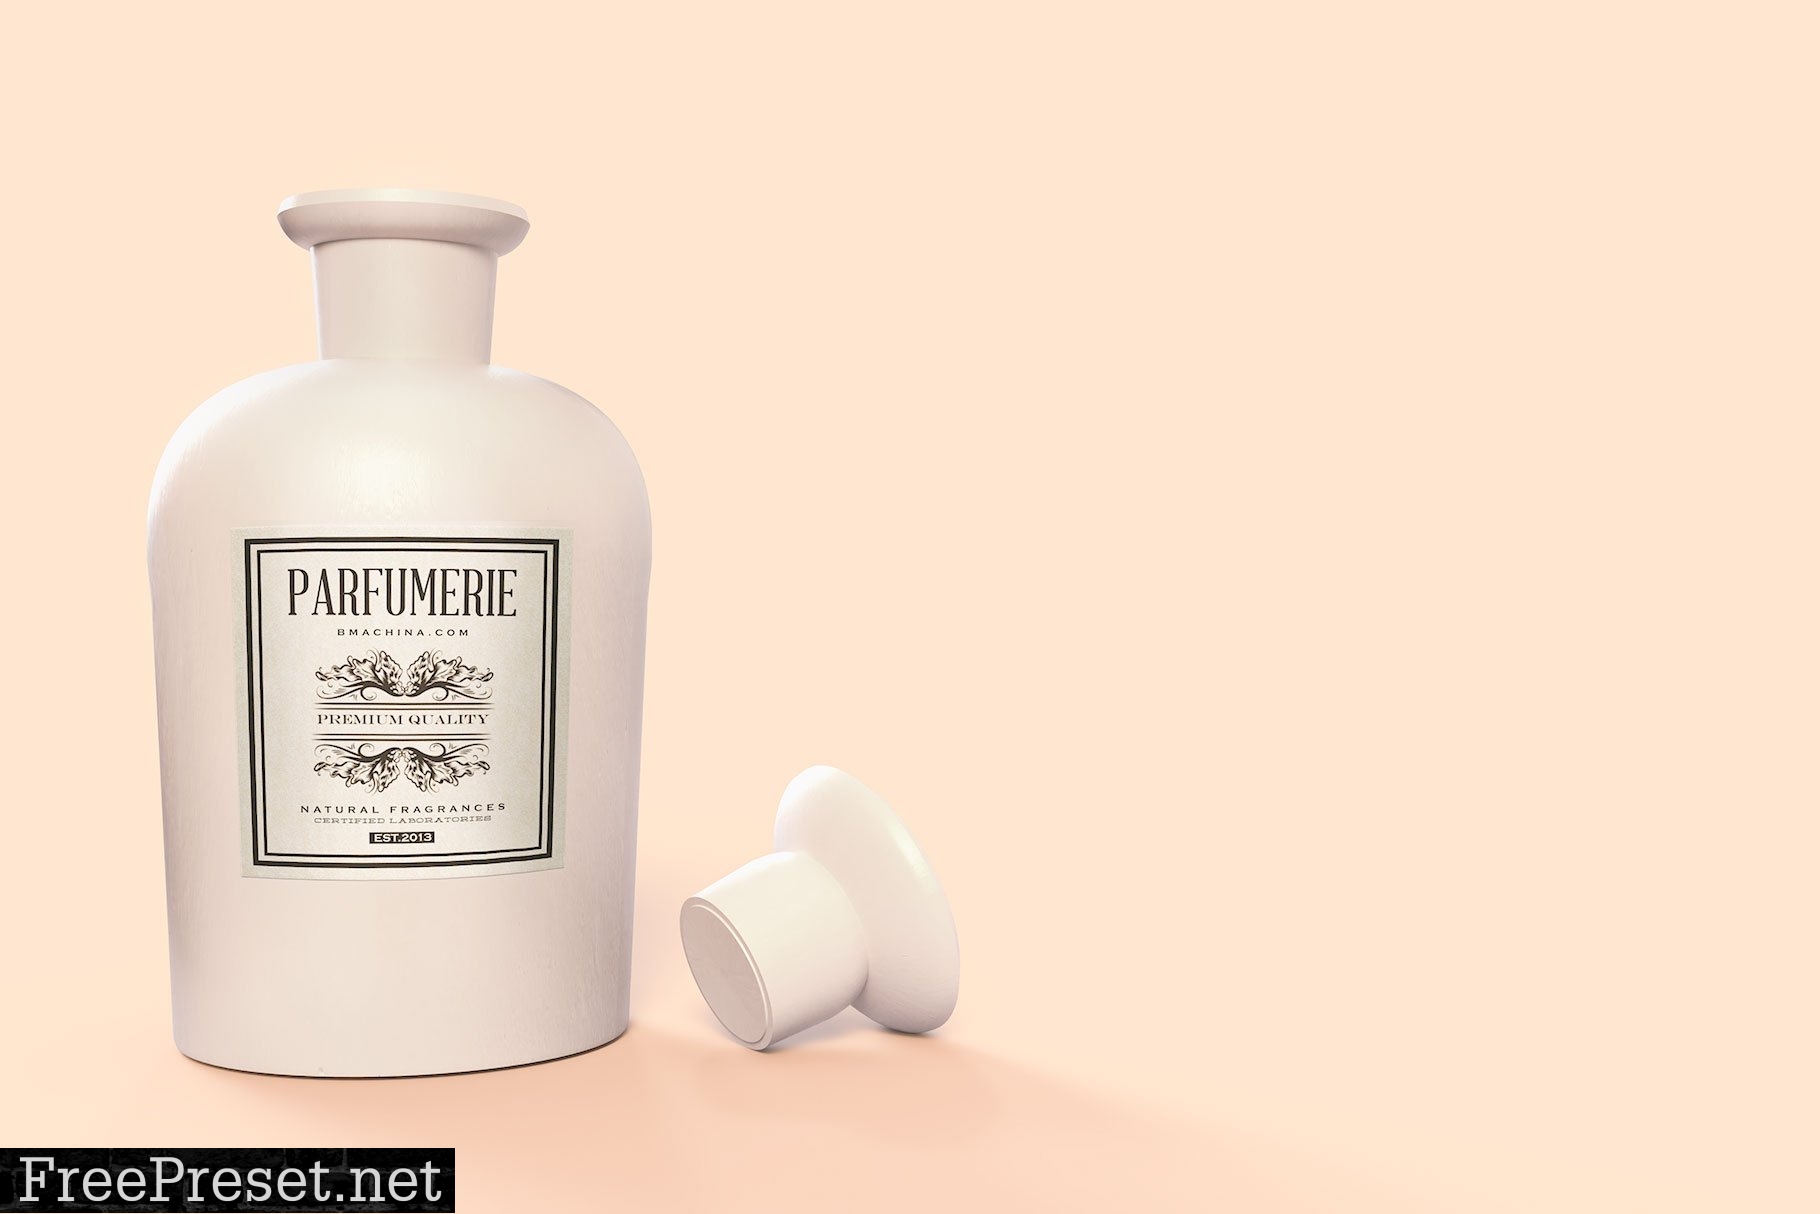 Pattern & Label Parfum Bottle Mockup 4517819A vintage pharmacy bottle to show off your designs with style or simply to see how they look like in different environment.  Pattern&Label Parfum Bottle Mockup  Pack includes 1 .psd files: 4500x3000 px, 300dpi and 1. PDF Help file; Changeable Label design via Smart Object; Changeable Bottle patterns via Smart Object Changeable background; Great pattern by Mariia (FleurArt):  https://creativemarket.com/FleurArt  *Patterns are not included in the main zip file;  *Logo design not included in the main zip file  *Photoshop CS4 or above required for editing Smart Objects